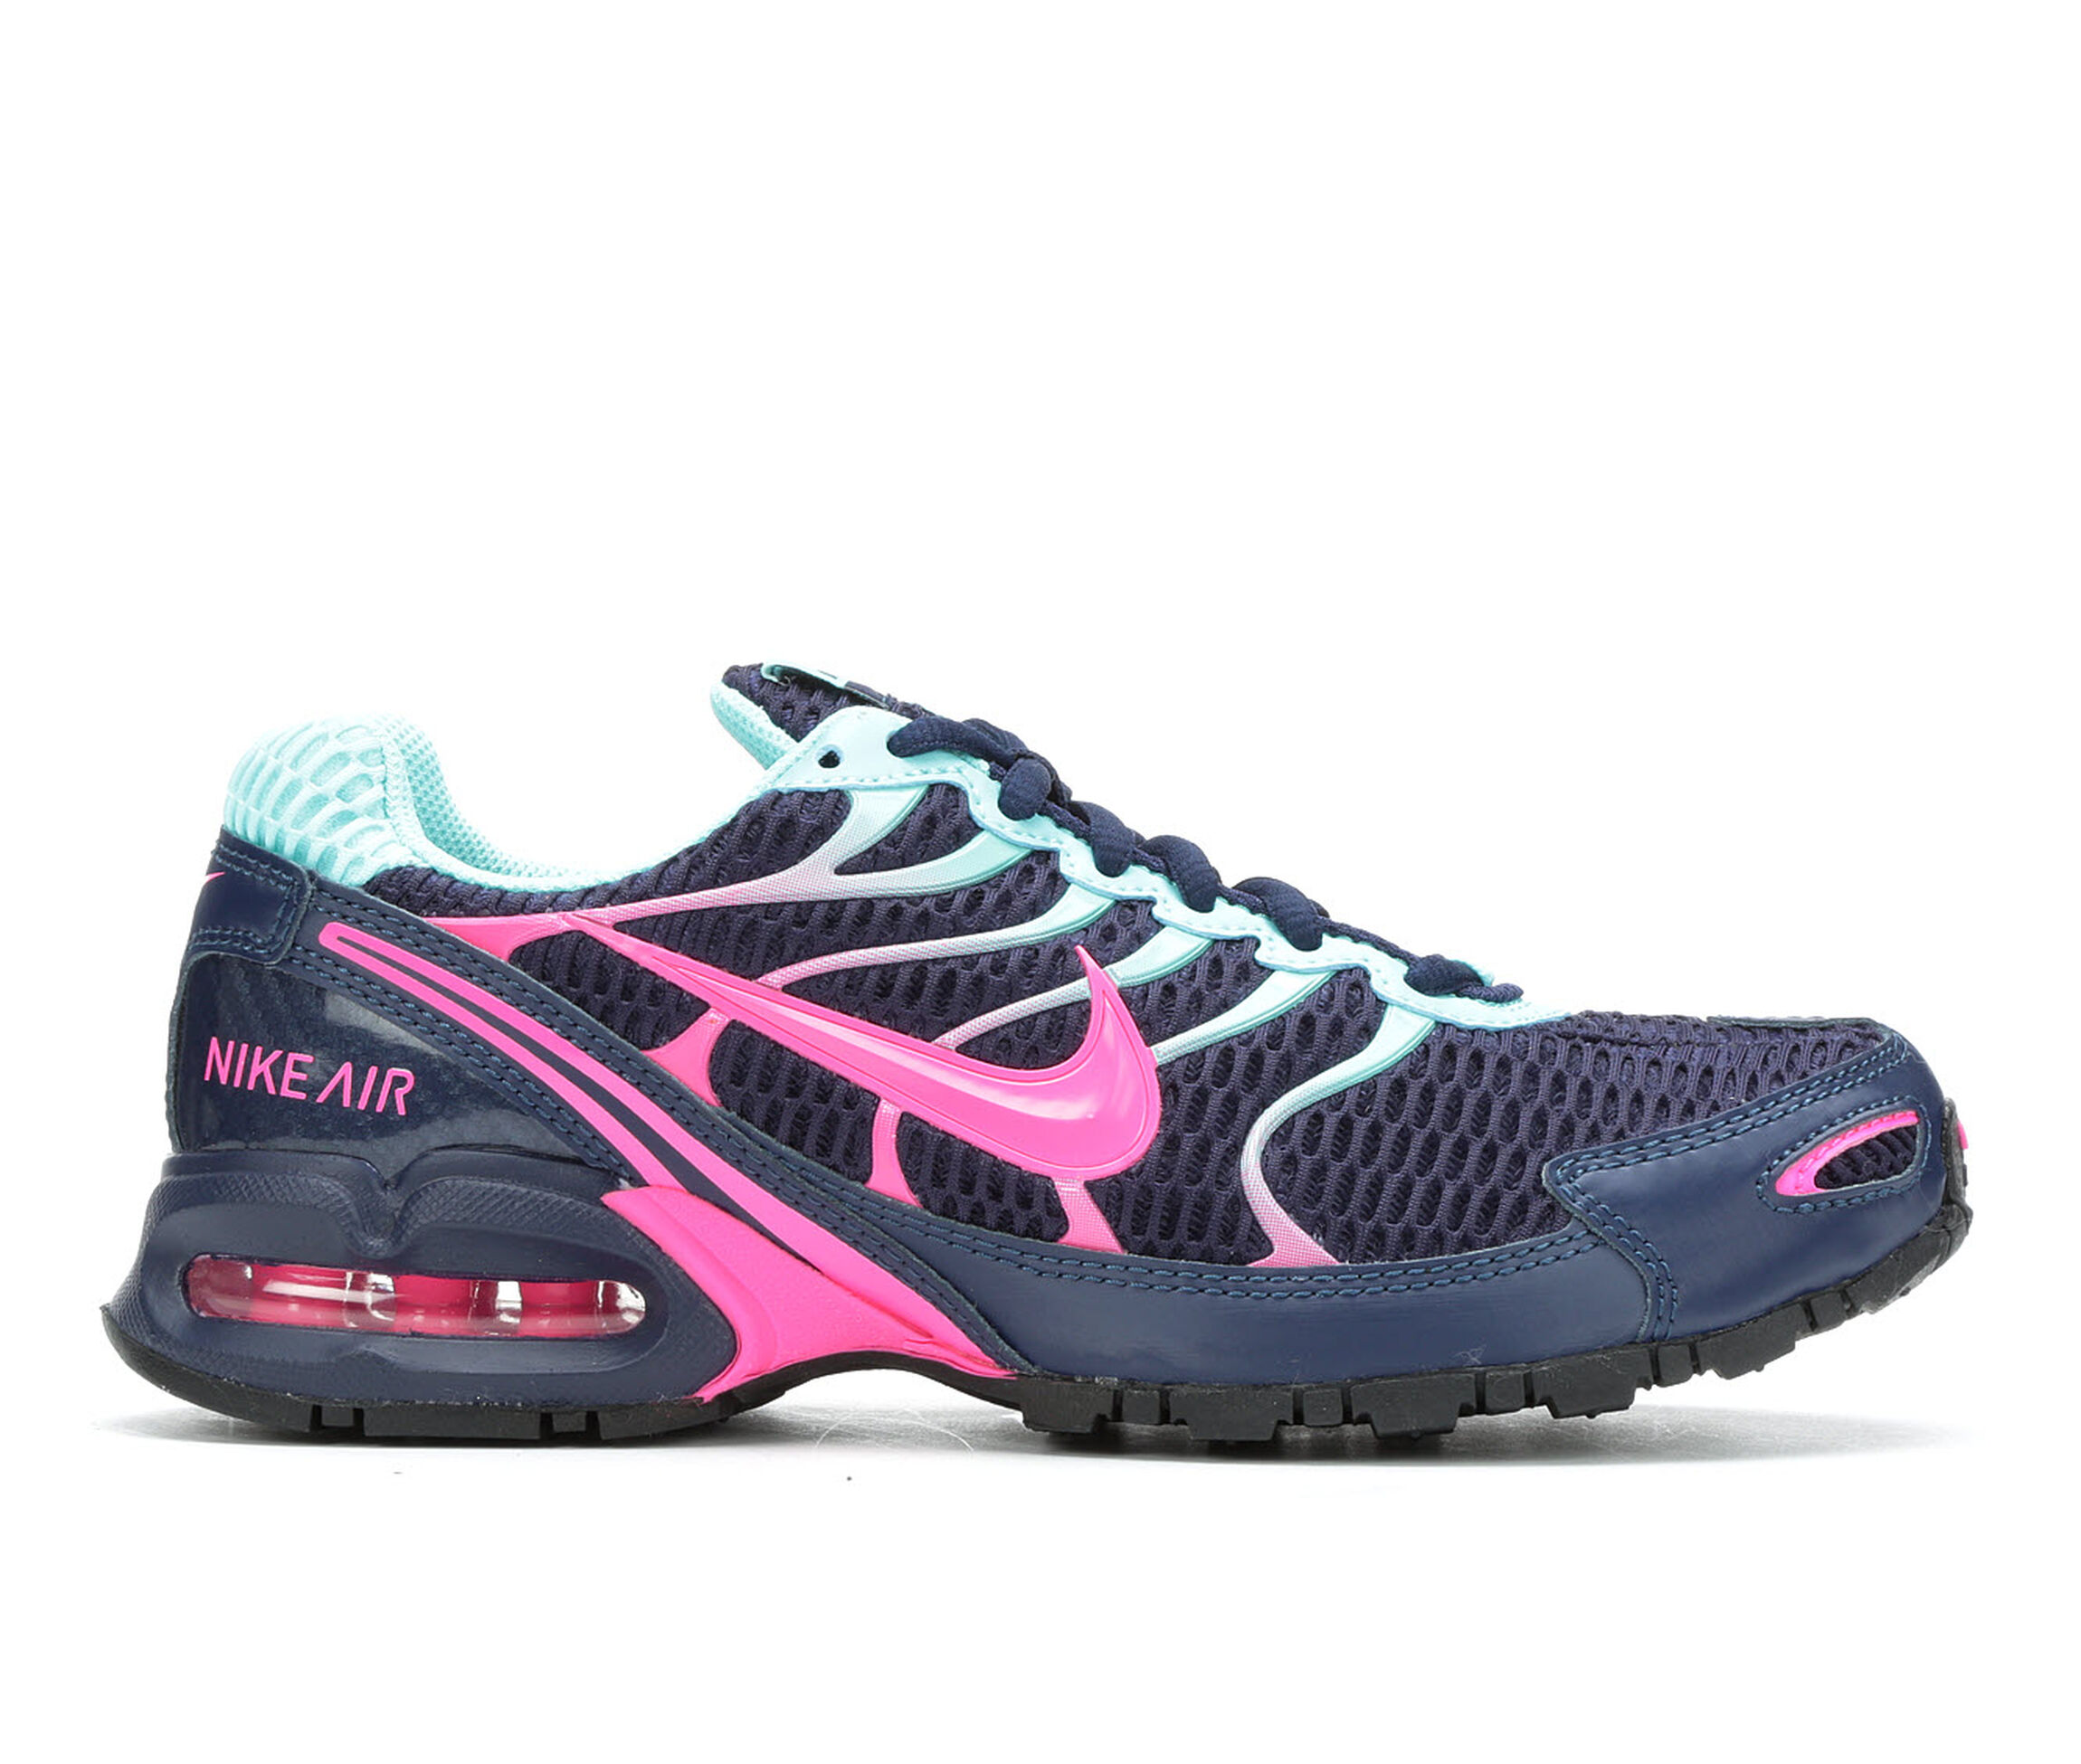 women's air max torch 4 running sneakers from finish line